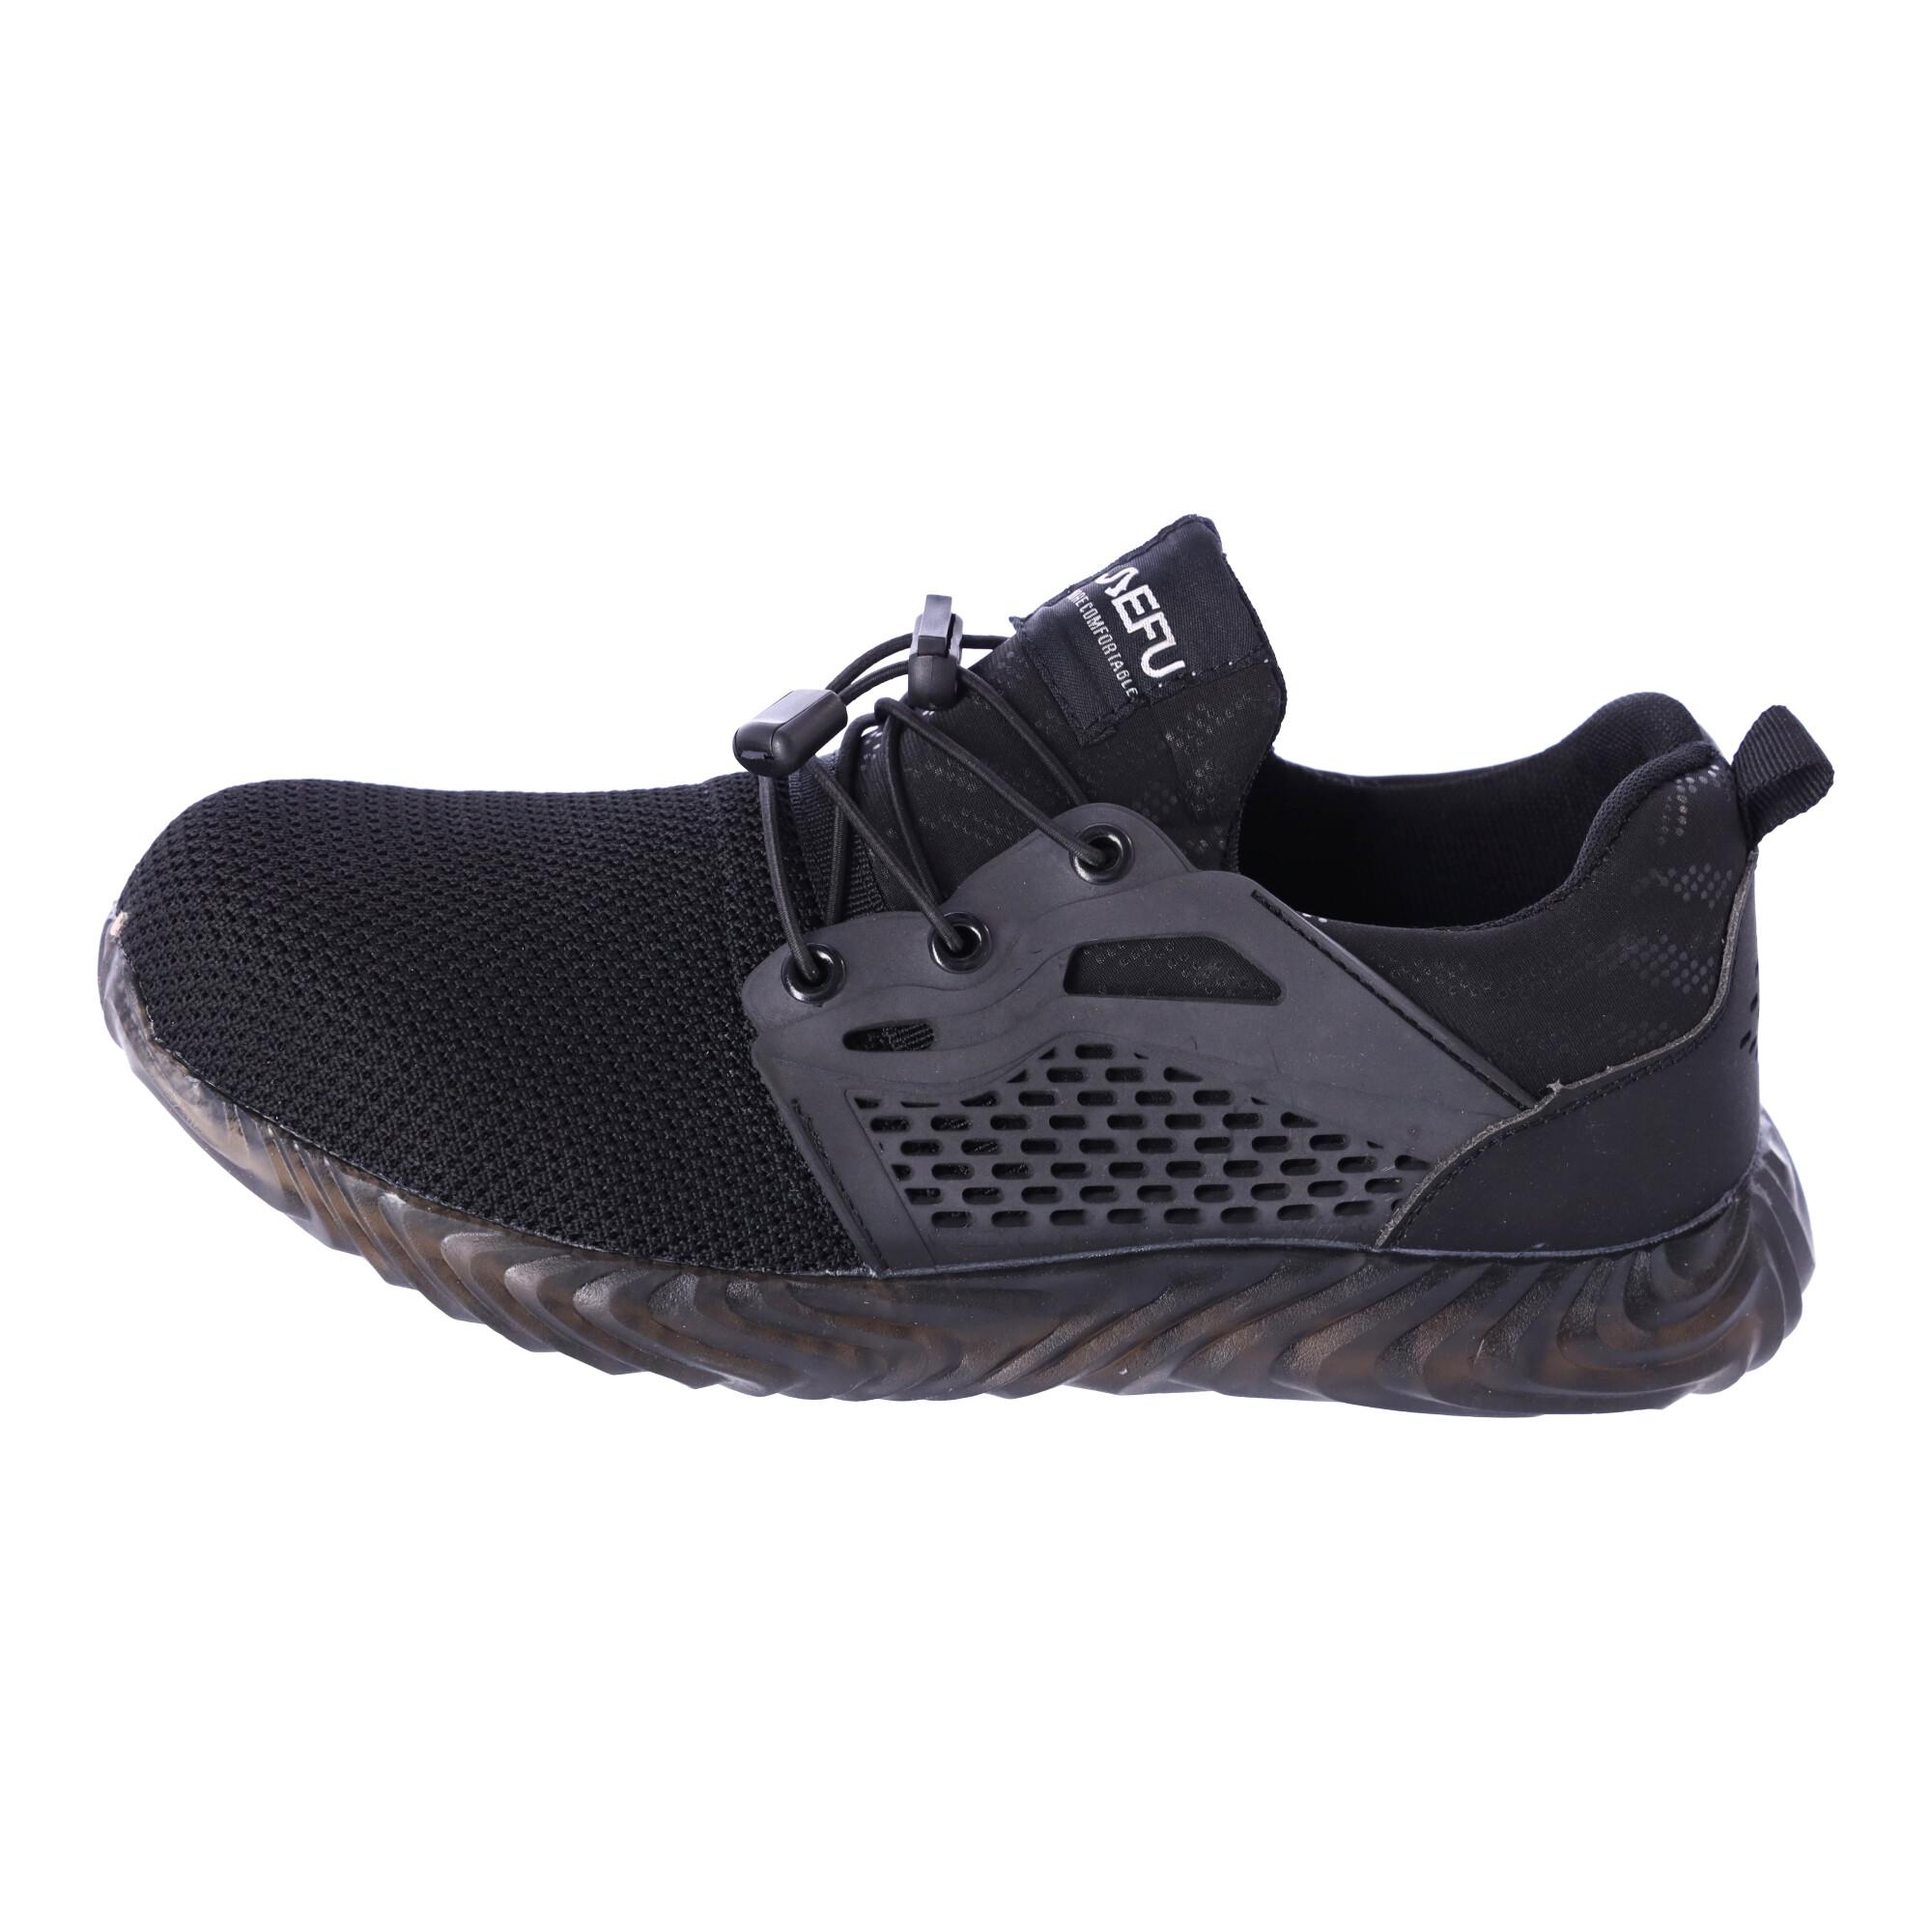 Work safety shoes "43" - black